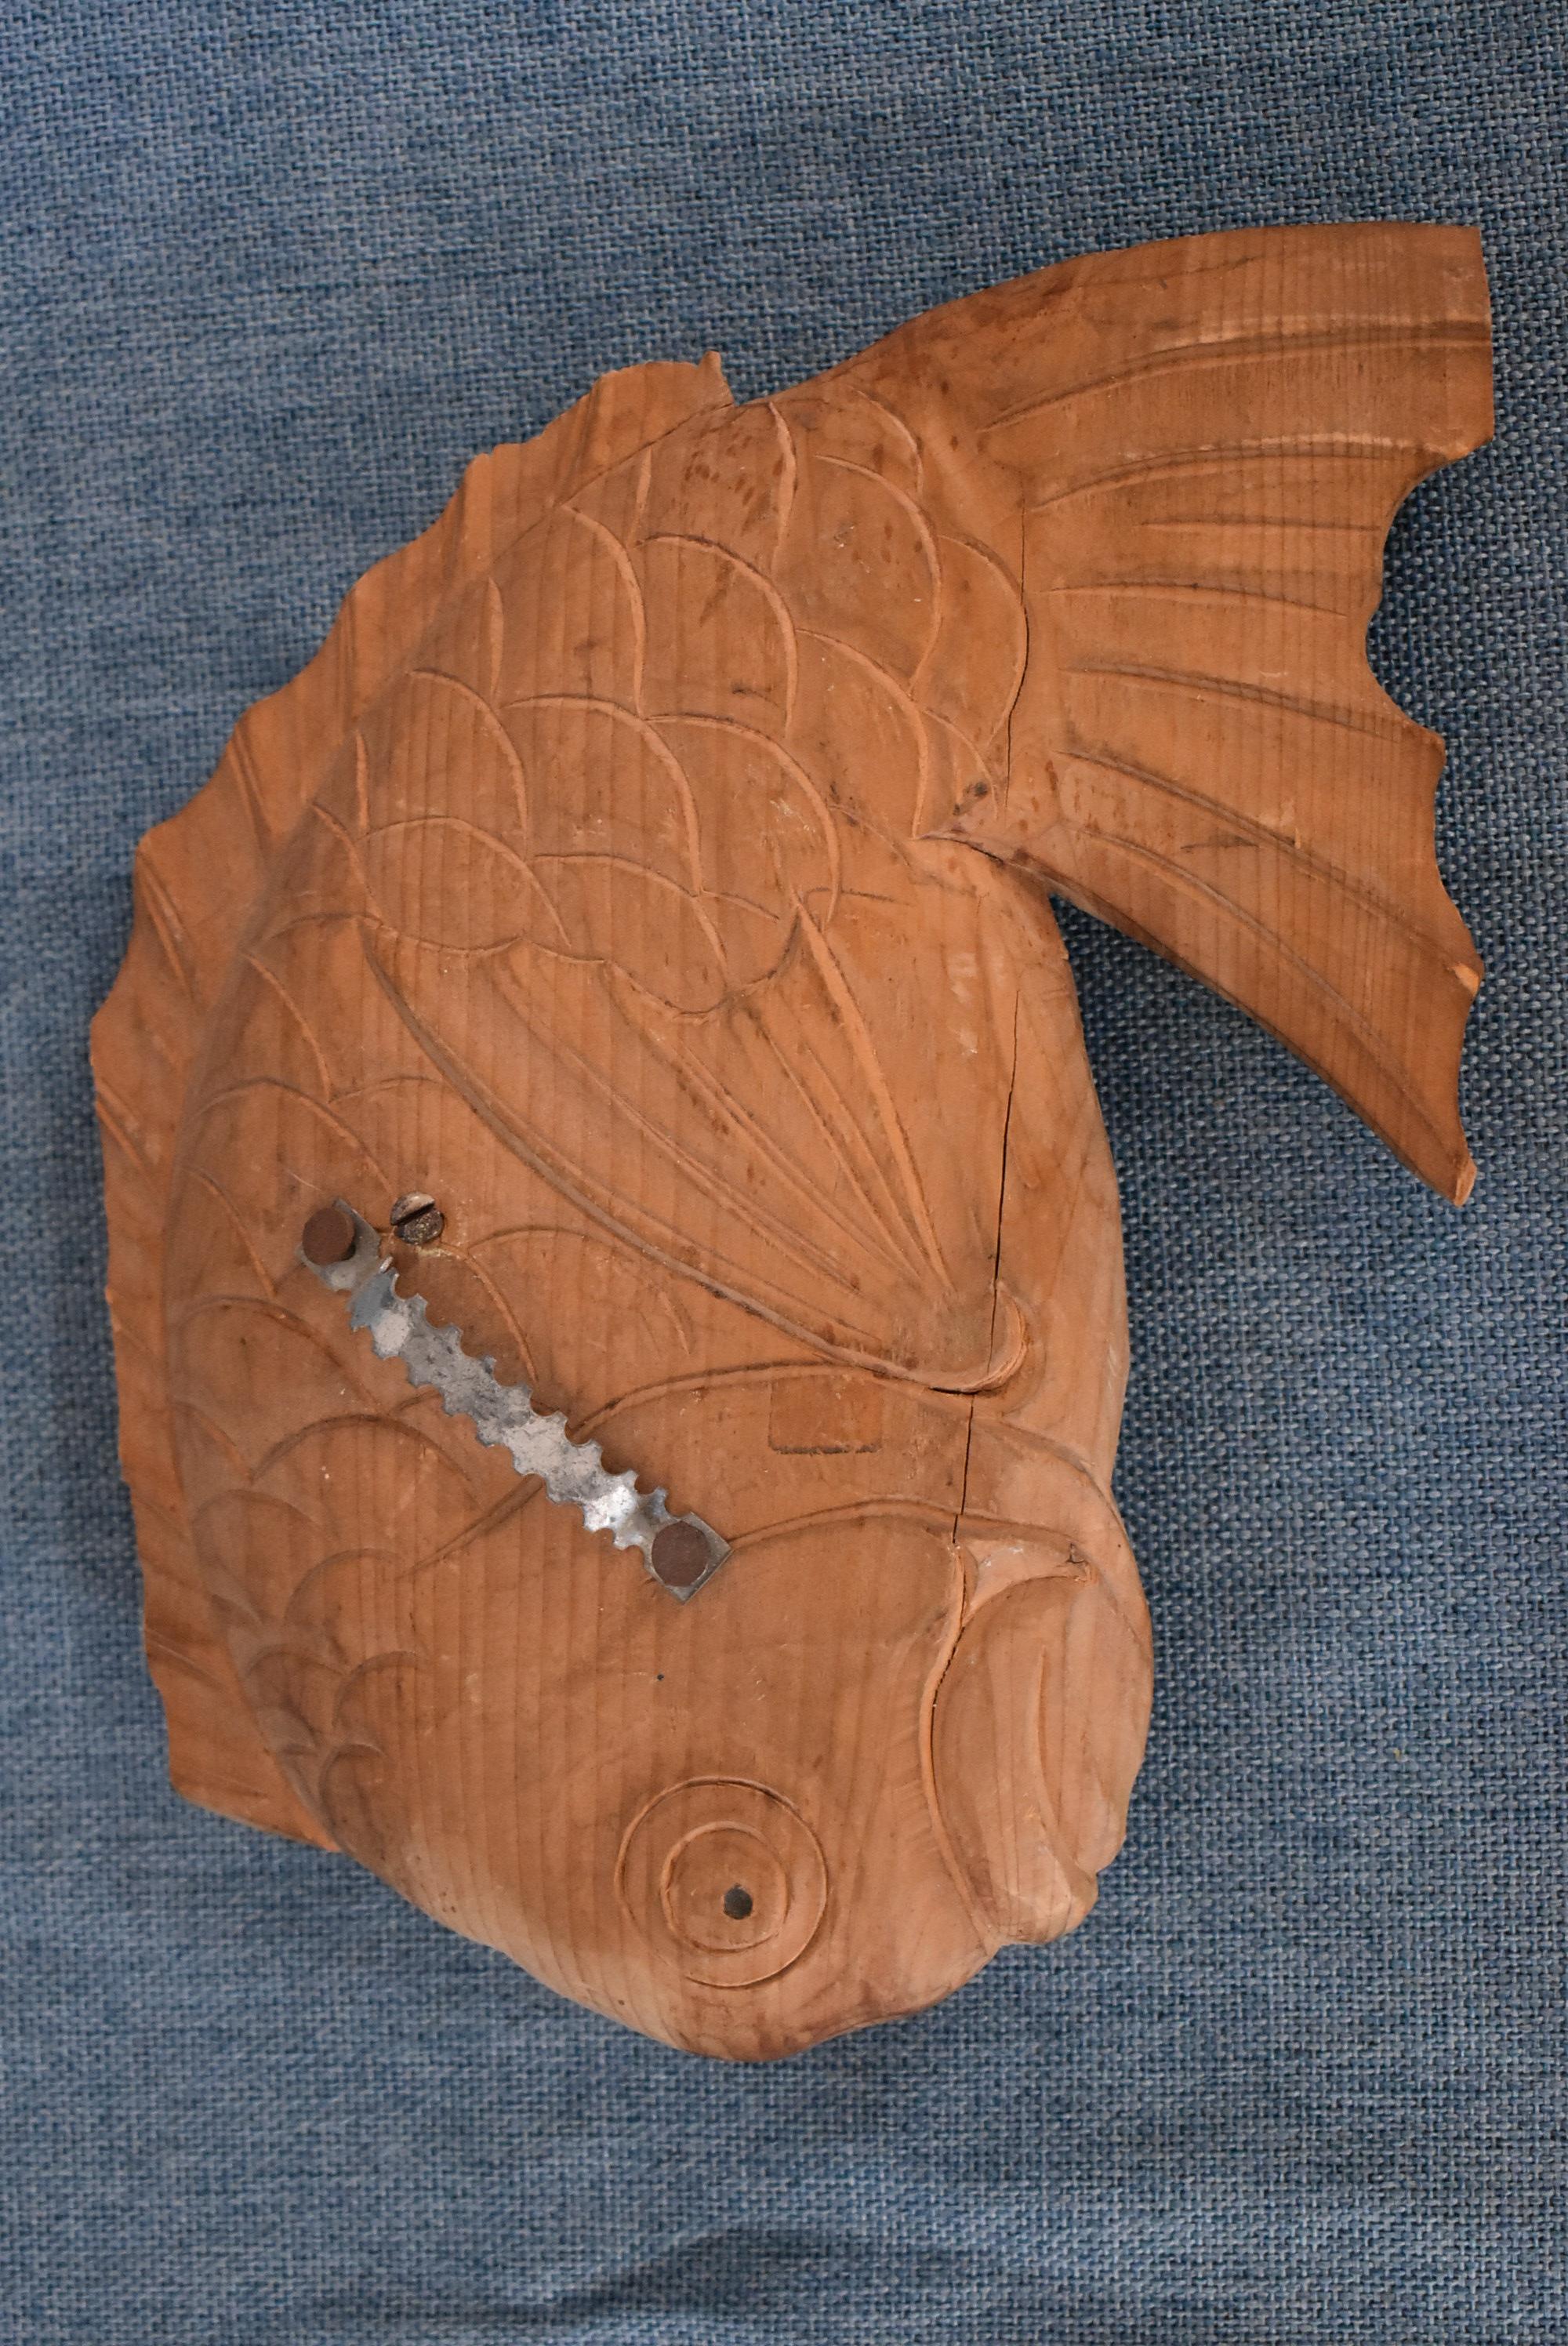 HAND CARVED WOODEN FISH!